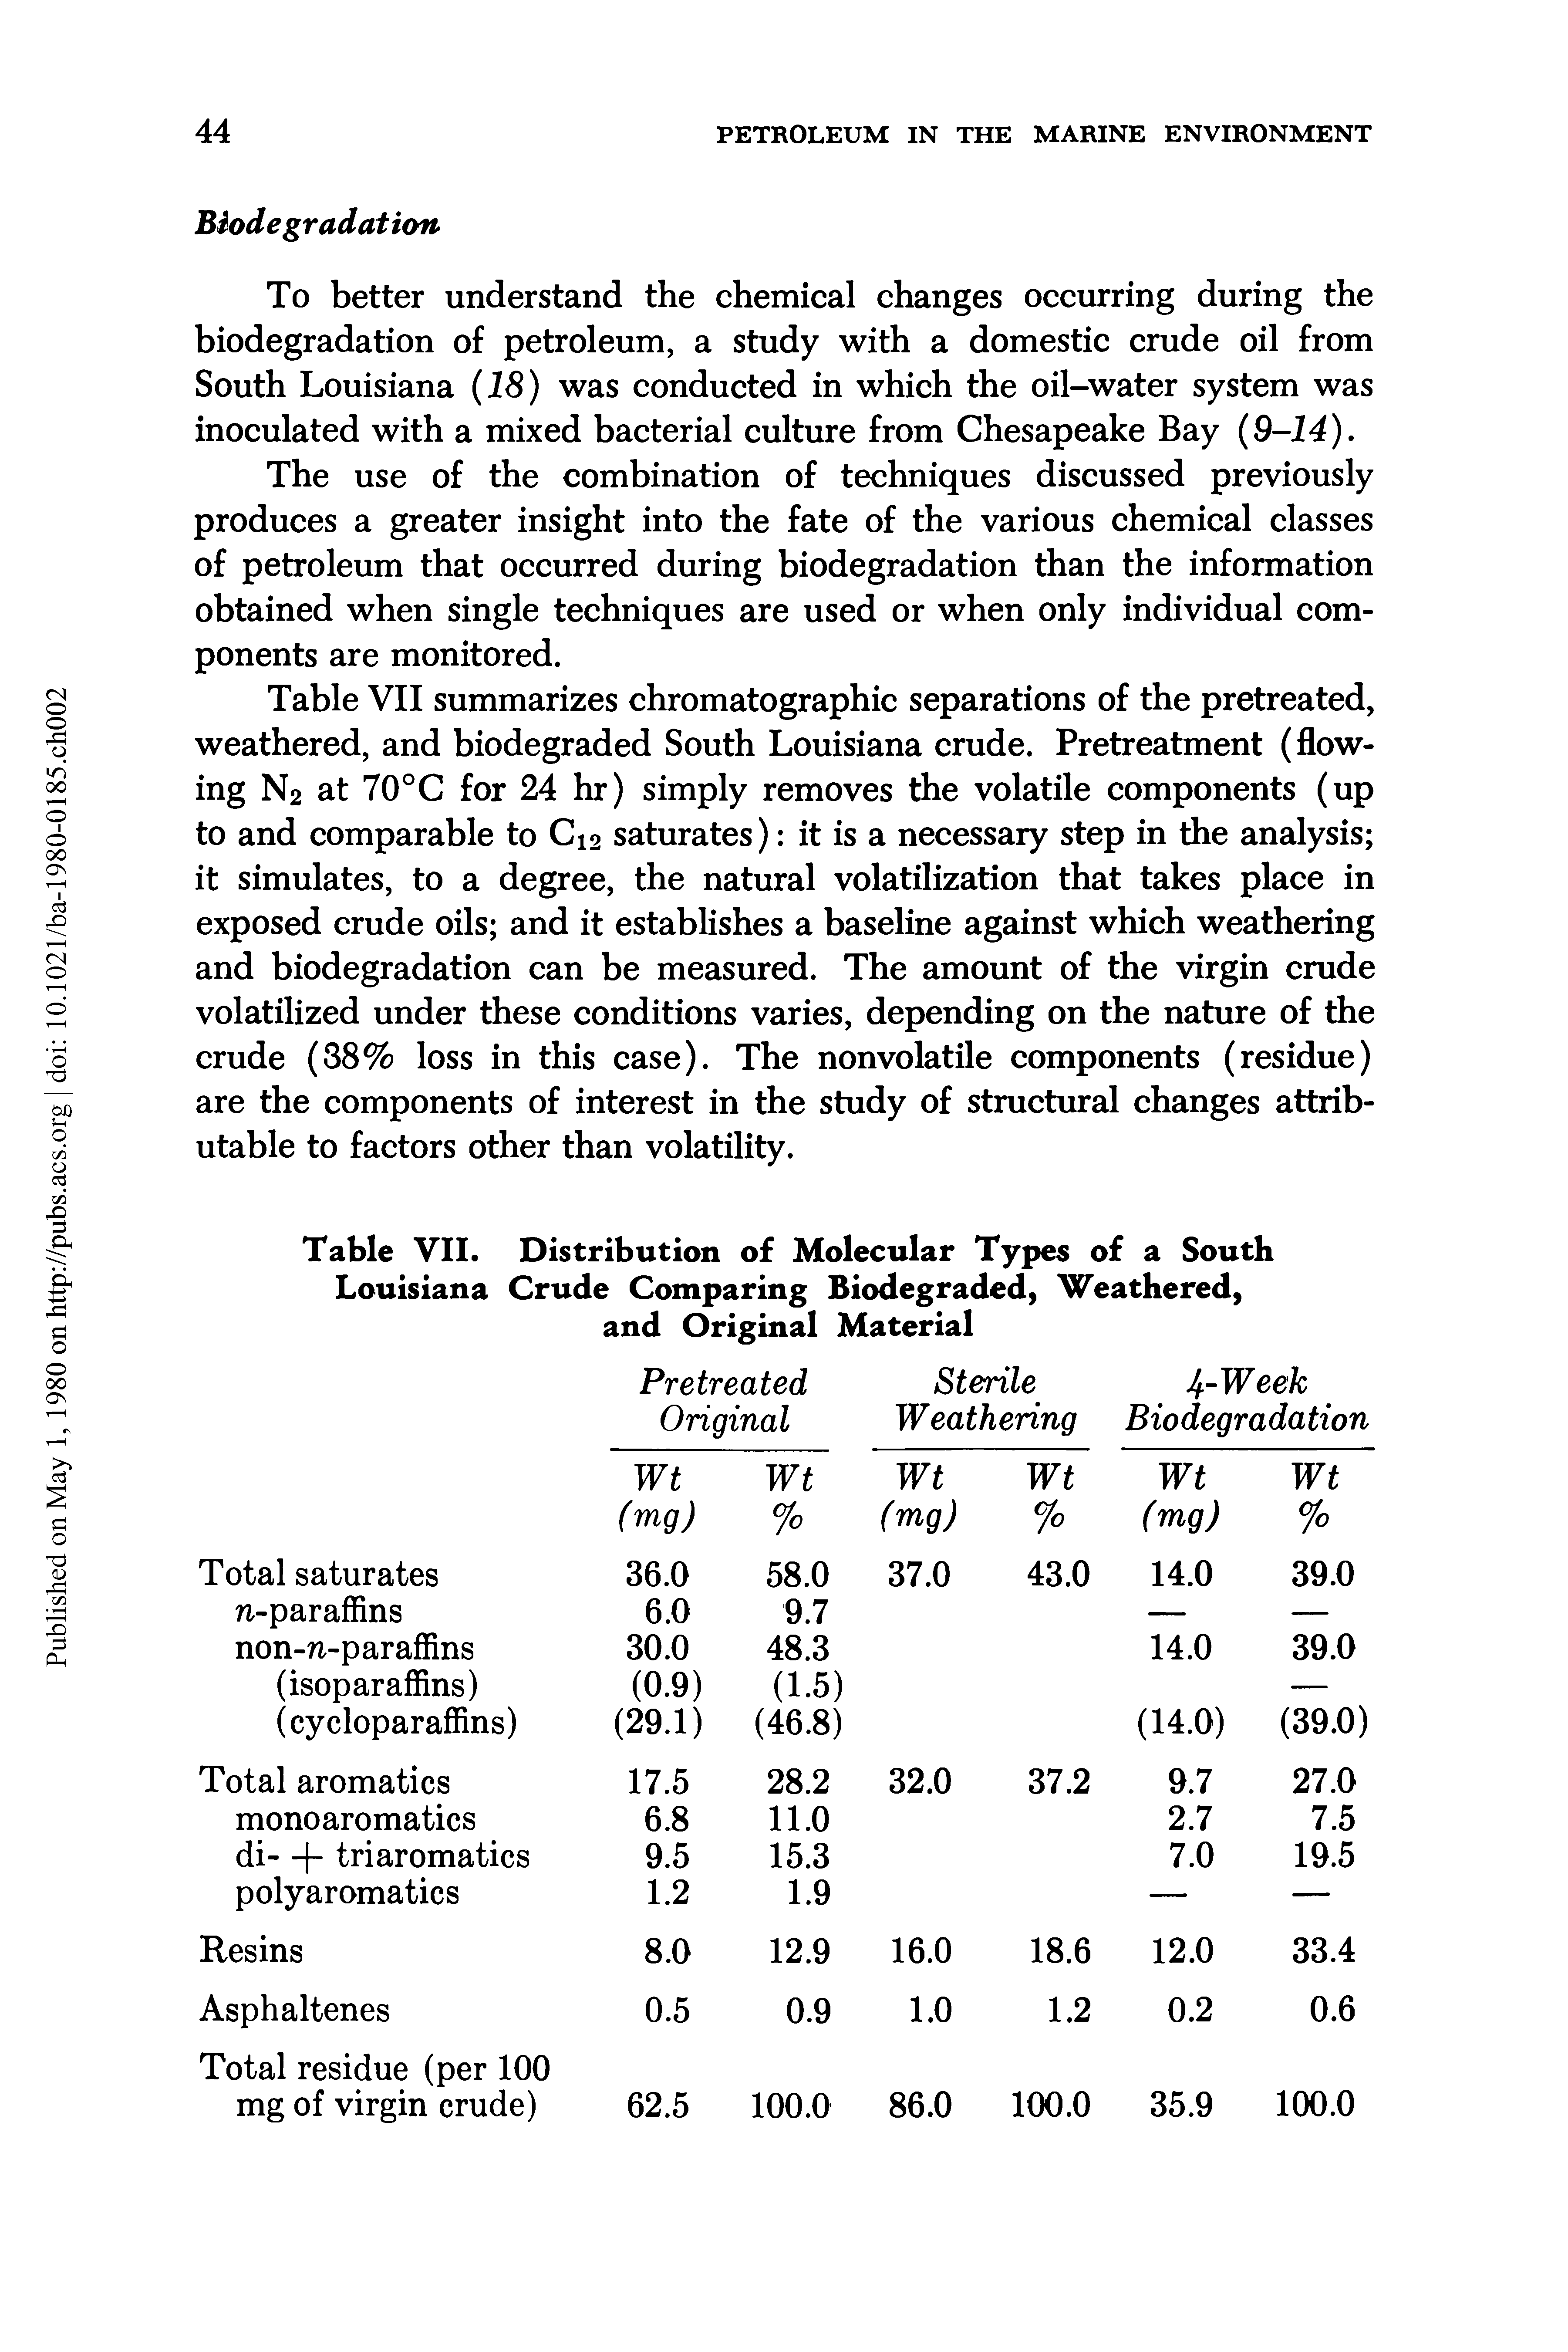 Table VII. Distribution of Molecular Types of a South Louisiana Crude Comparing Biodegraded, Weathered, and Original Material...